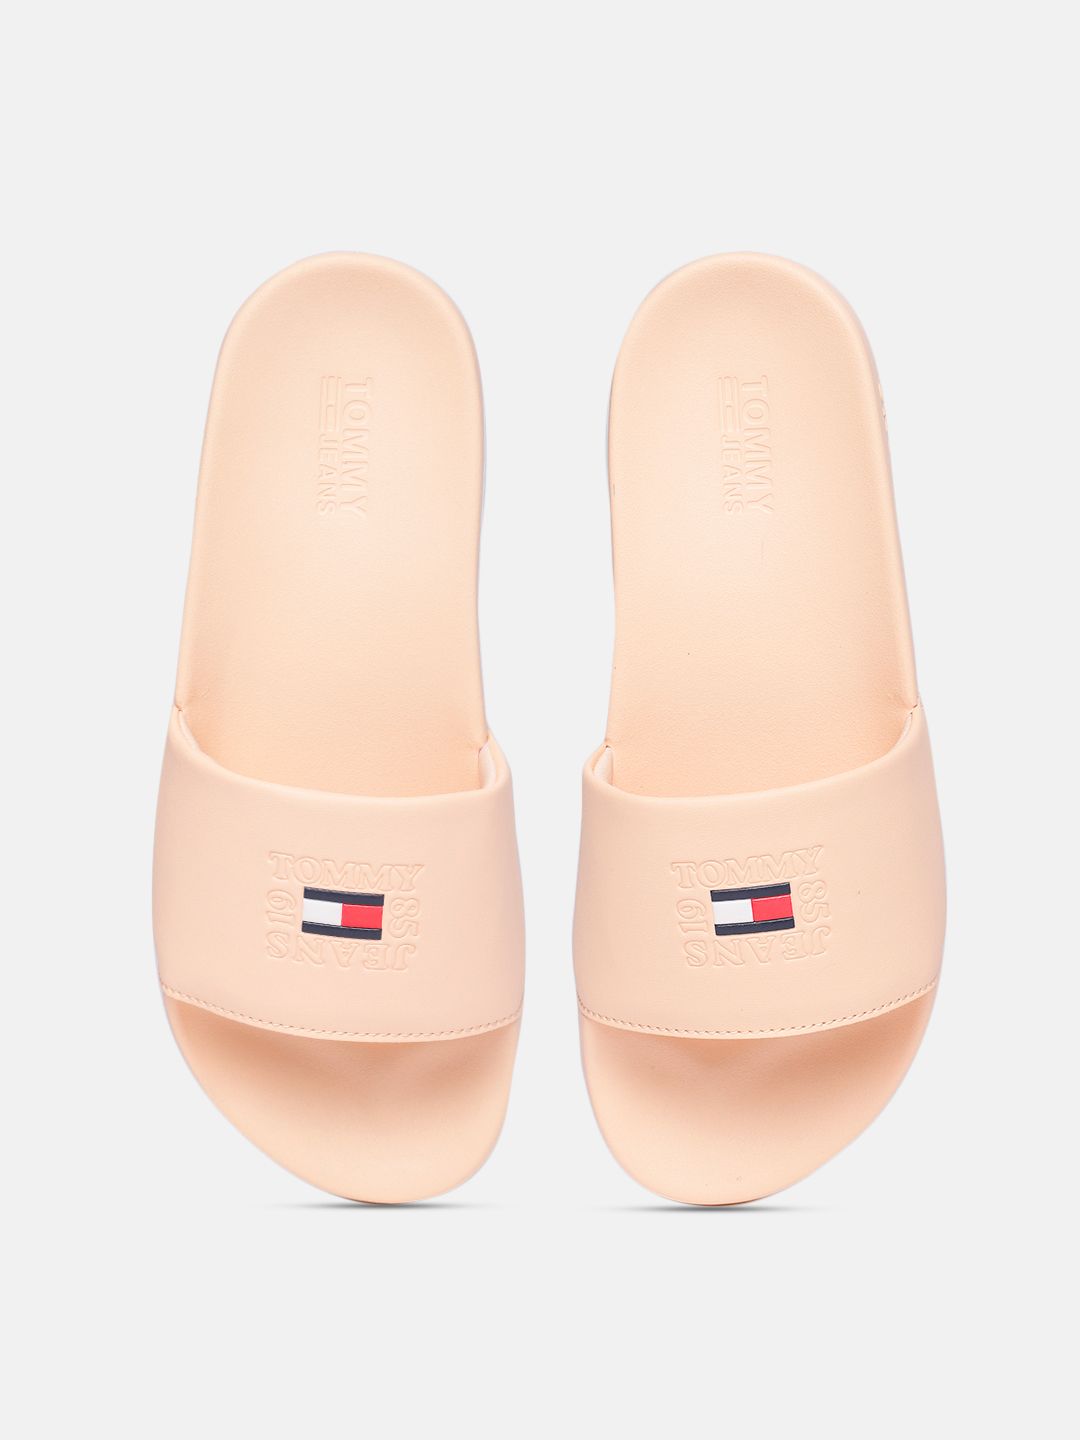 Tommy Hilfiger Women Pink Sliders Price in India